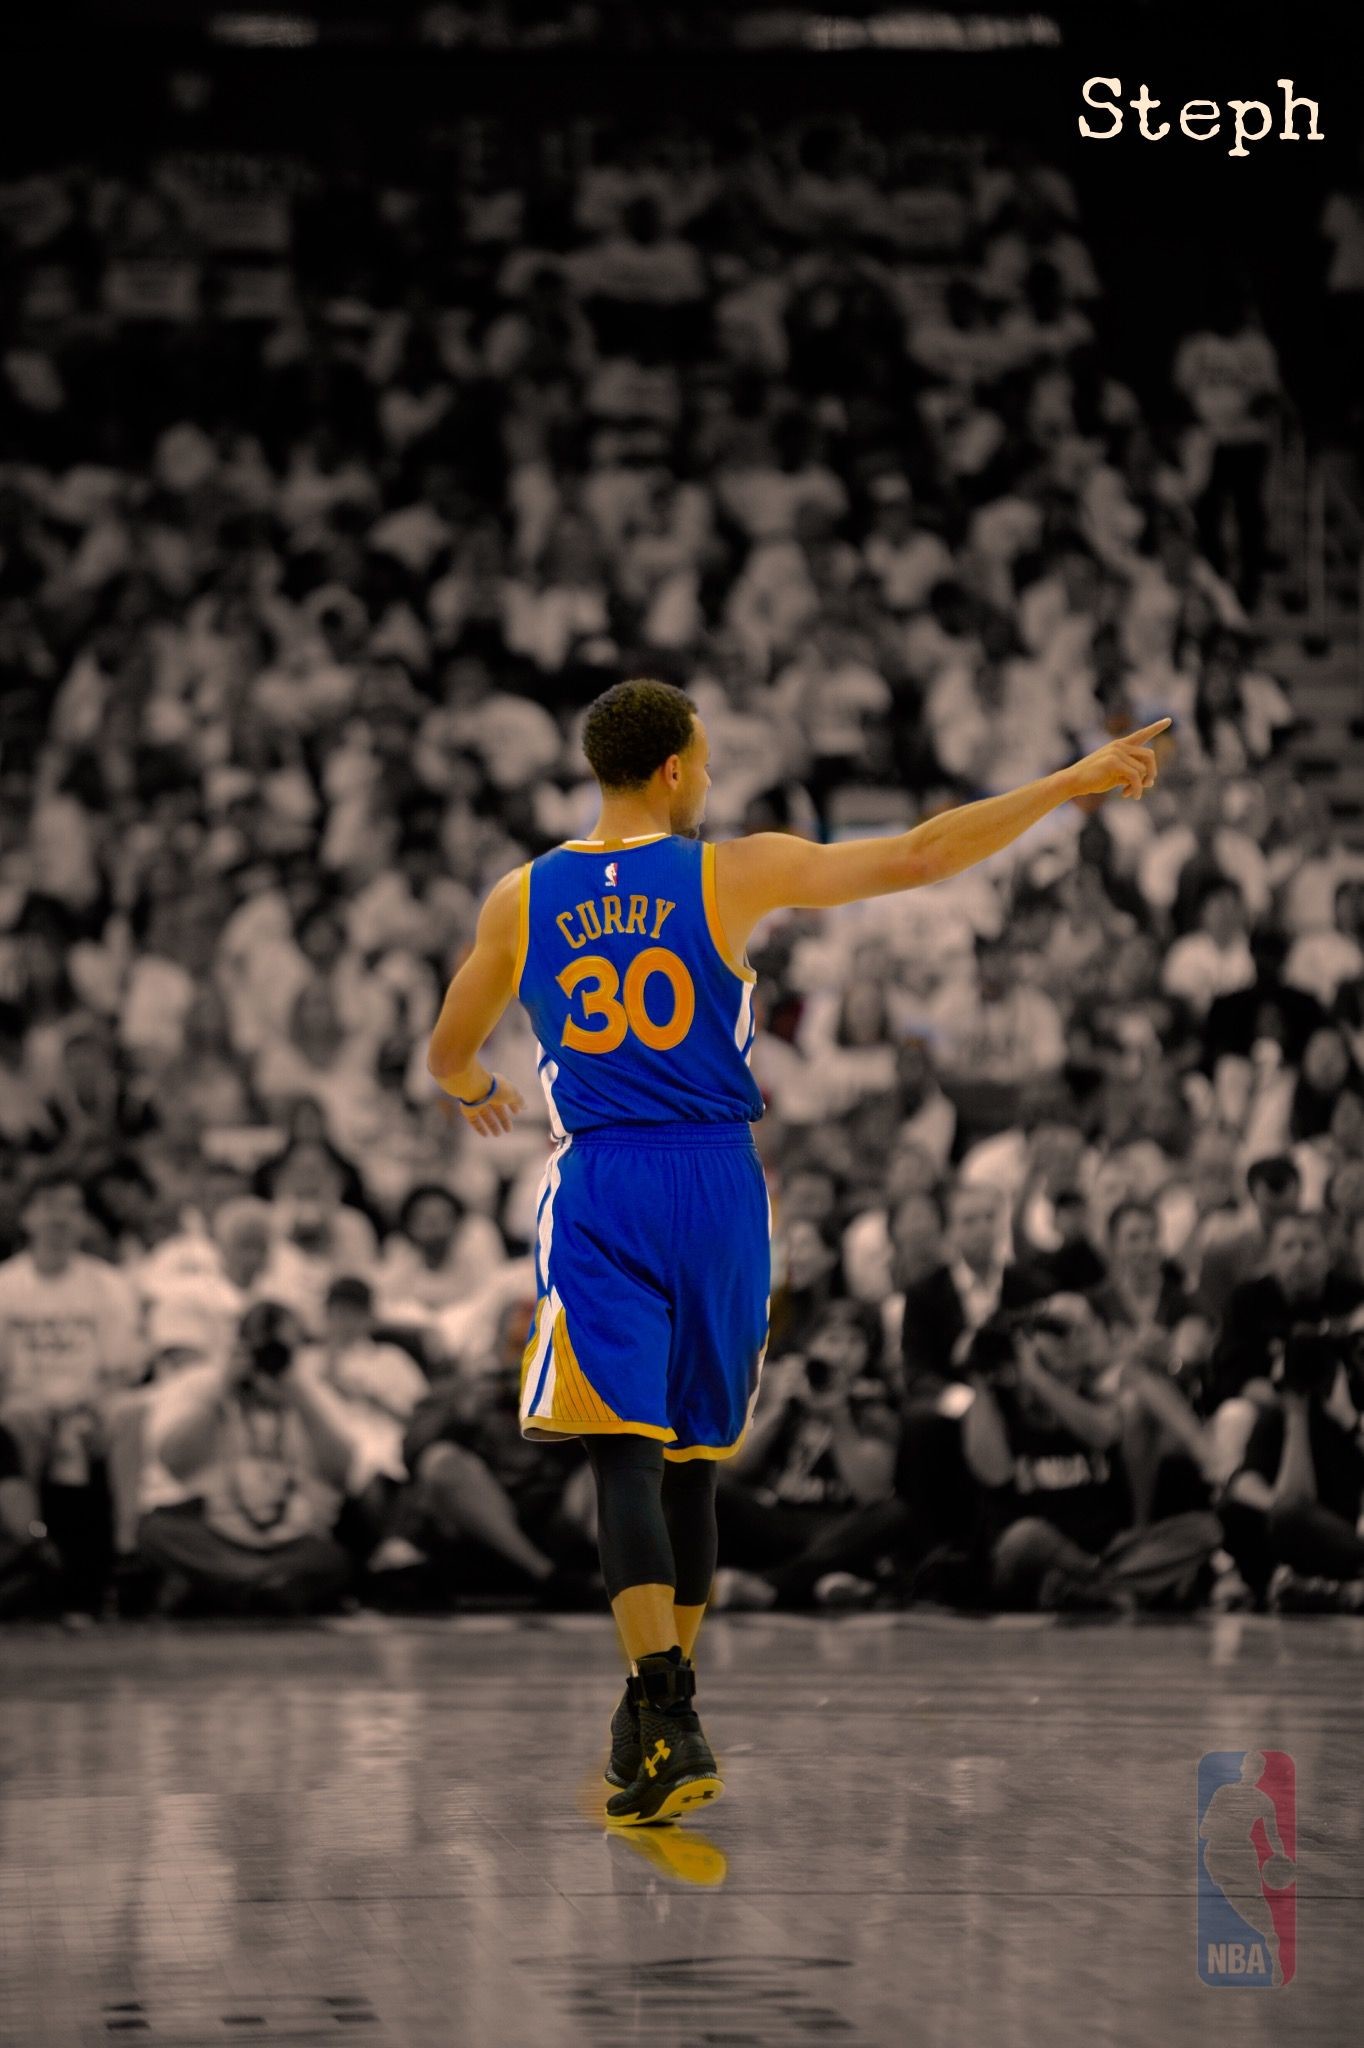 Any basketball fans Heres a wallpaper I made of Stephen Curry for OLED  devices  riphonewallpapers